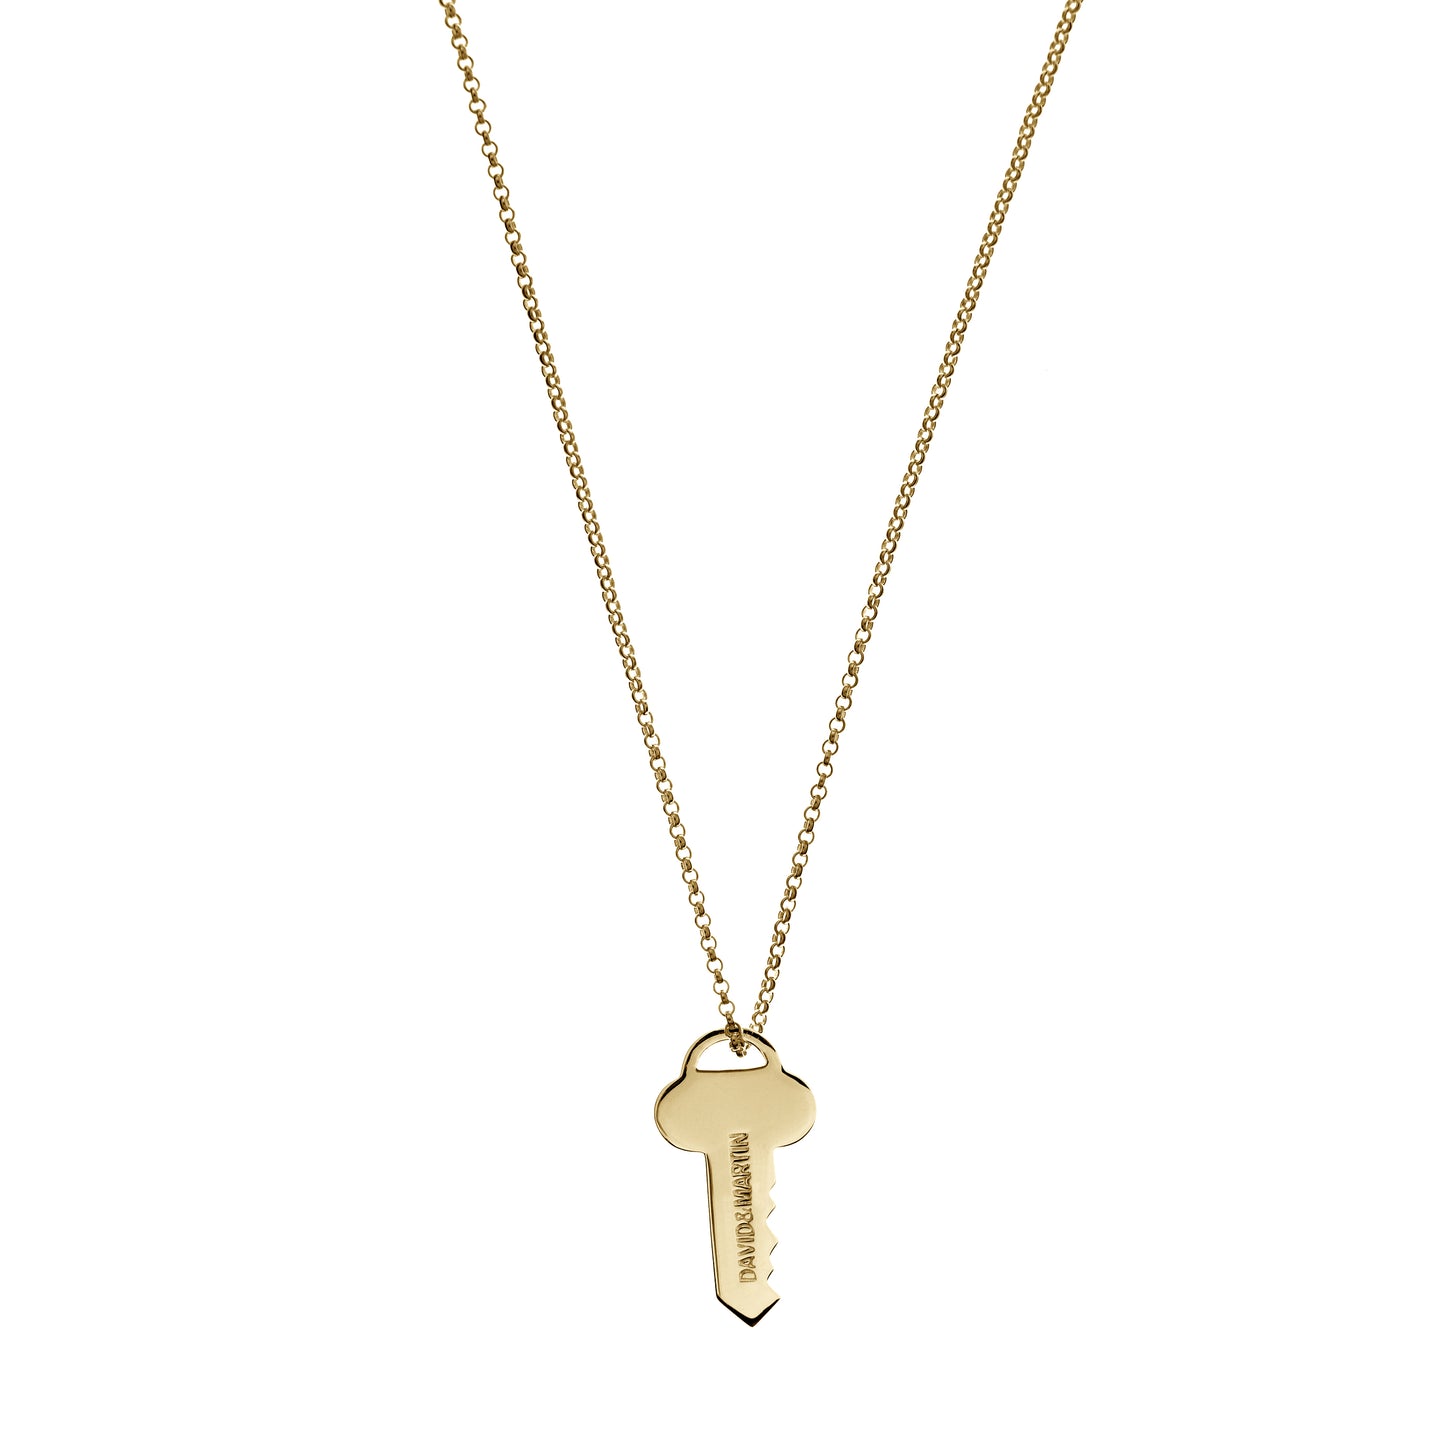 Minimalist unisex Key necklace.  Material: 18 karat gold-plated silver.  Size: the length is 45 cm.